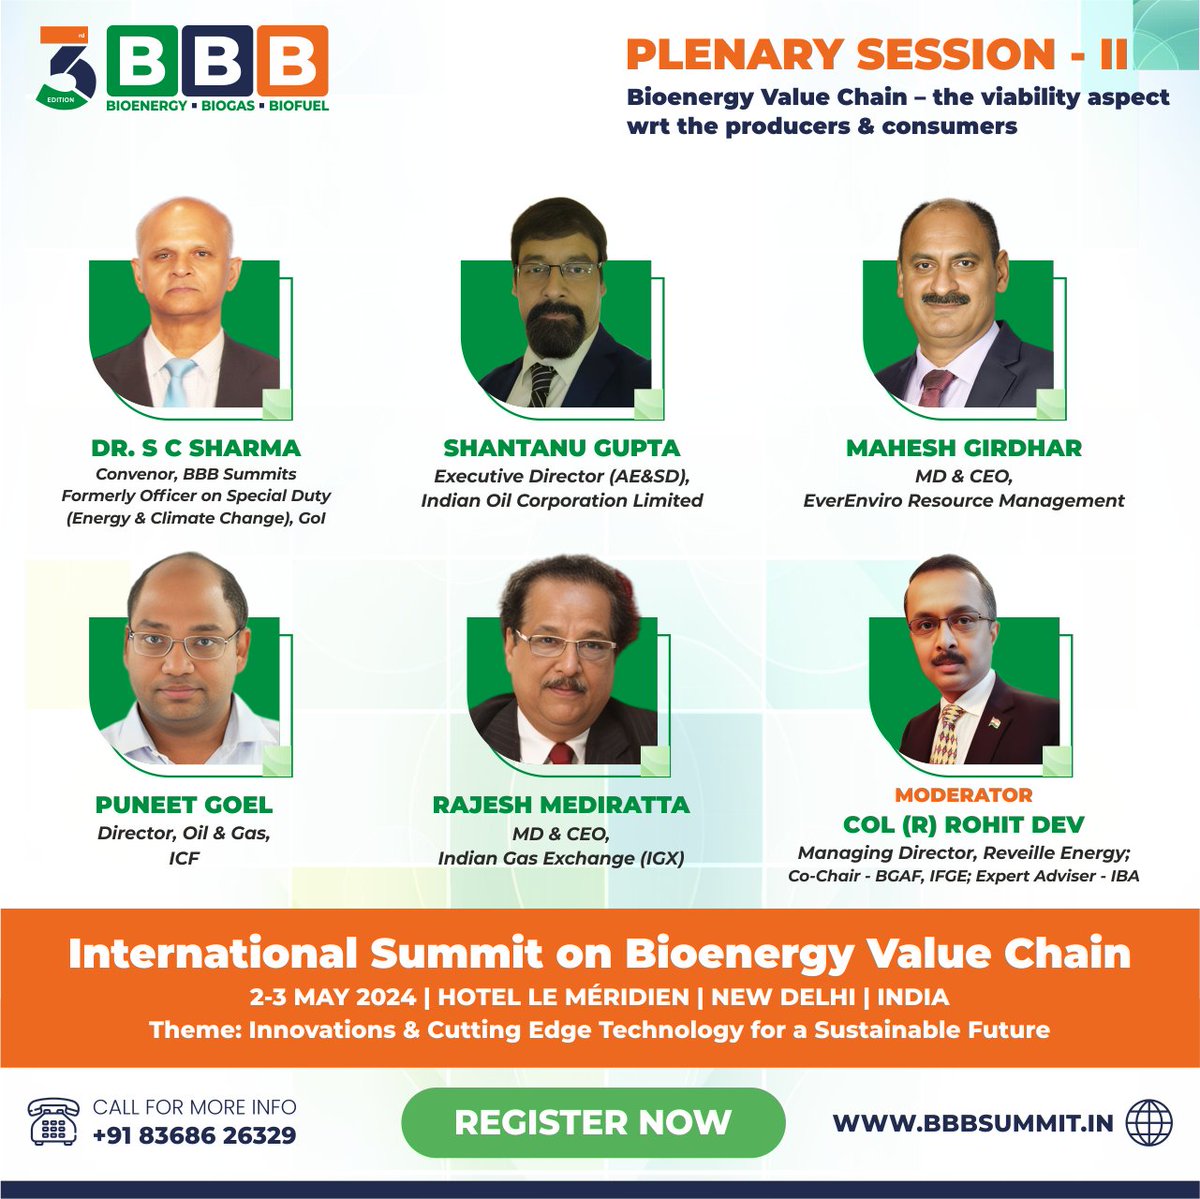 Bioenergy Biogas and Biofuels encompassed as a Full-spectrum Value Chain for Ideations at BBB Summit 2024 organised by BBB Summit at New Delhi on 02 and 03 May 2024 We will dwell into Bioenergy Value Chain on 3rd May 2024 and your Inquisitiveness will Ignite a Transition we are…